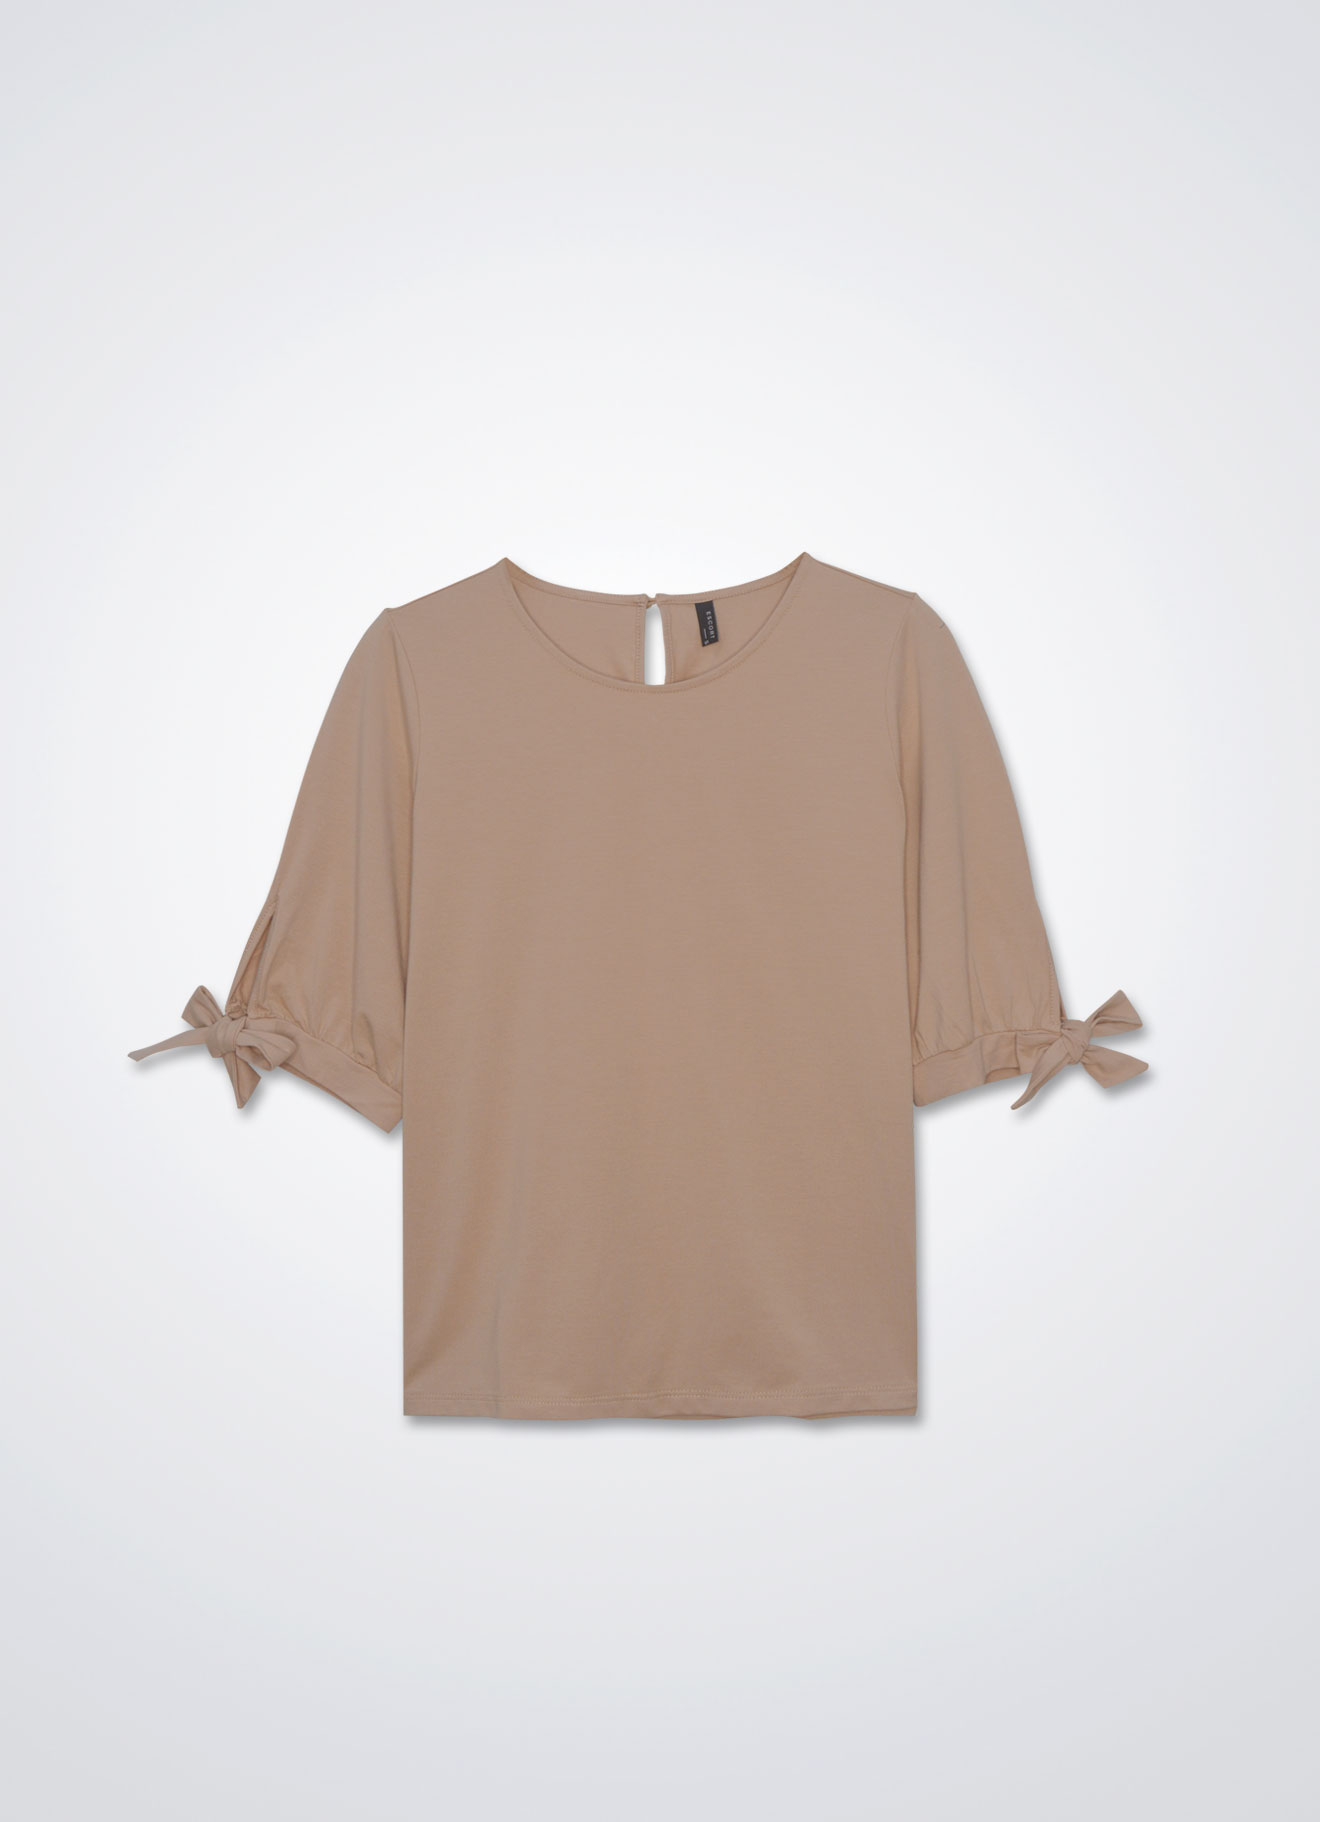 Bisque by Sleeve Top